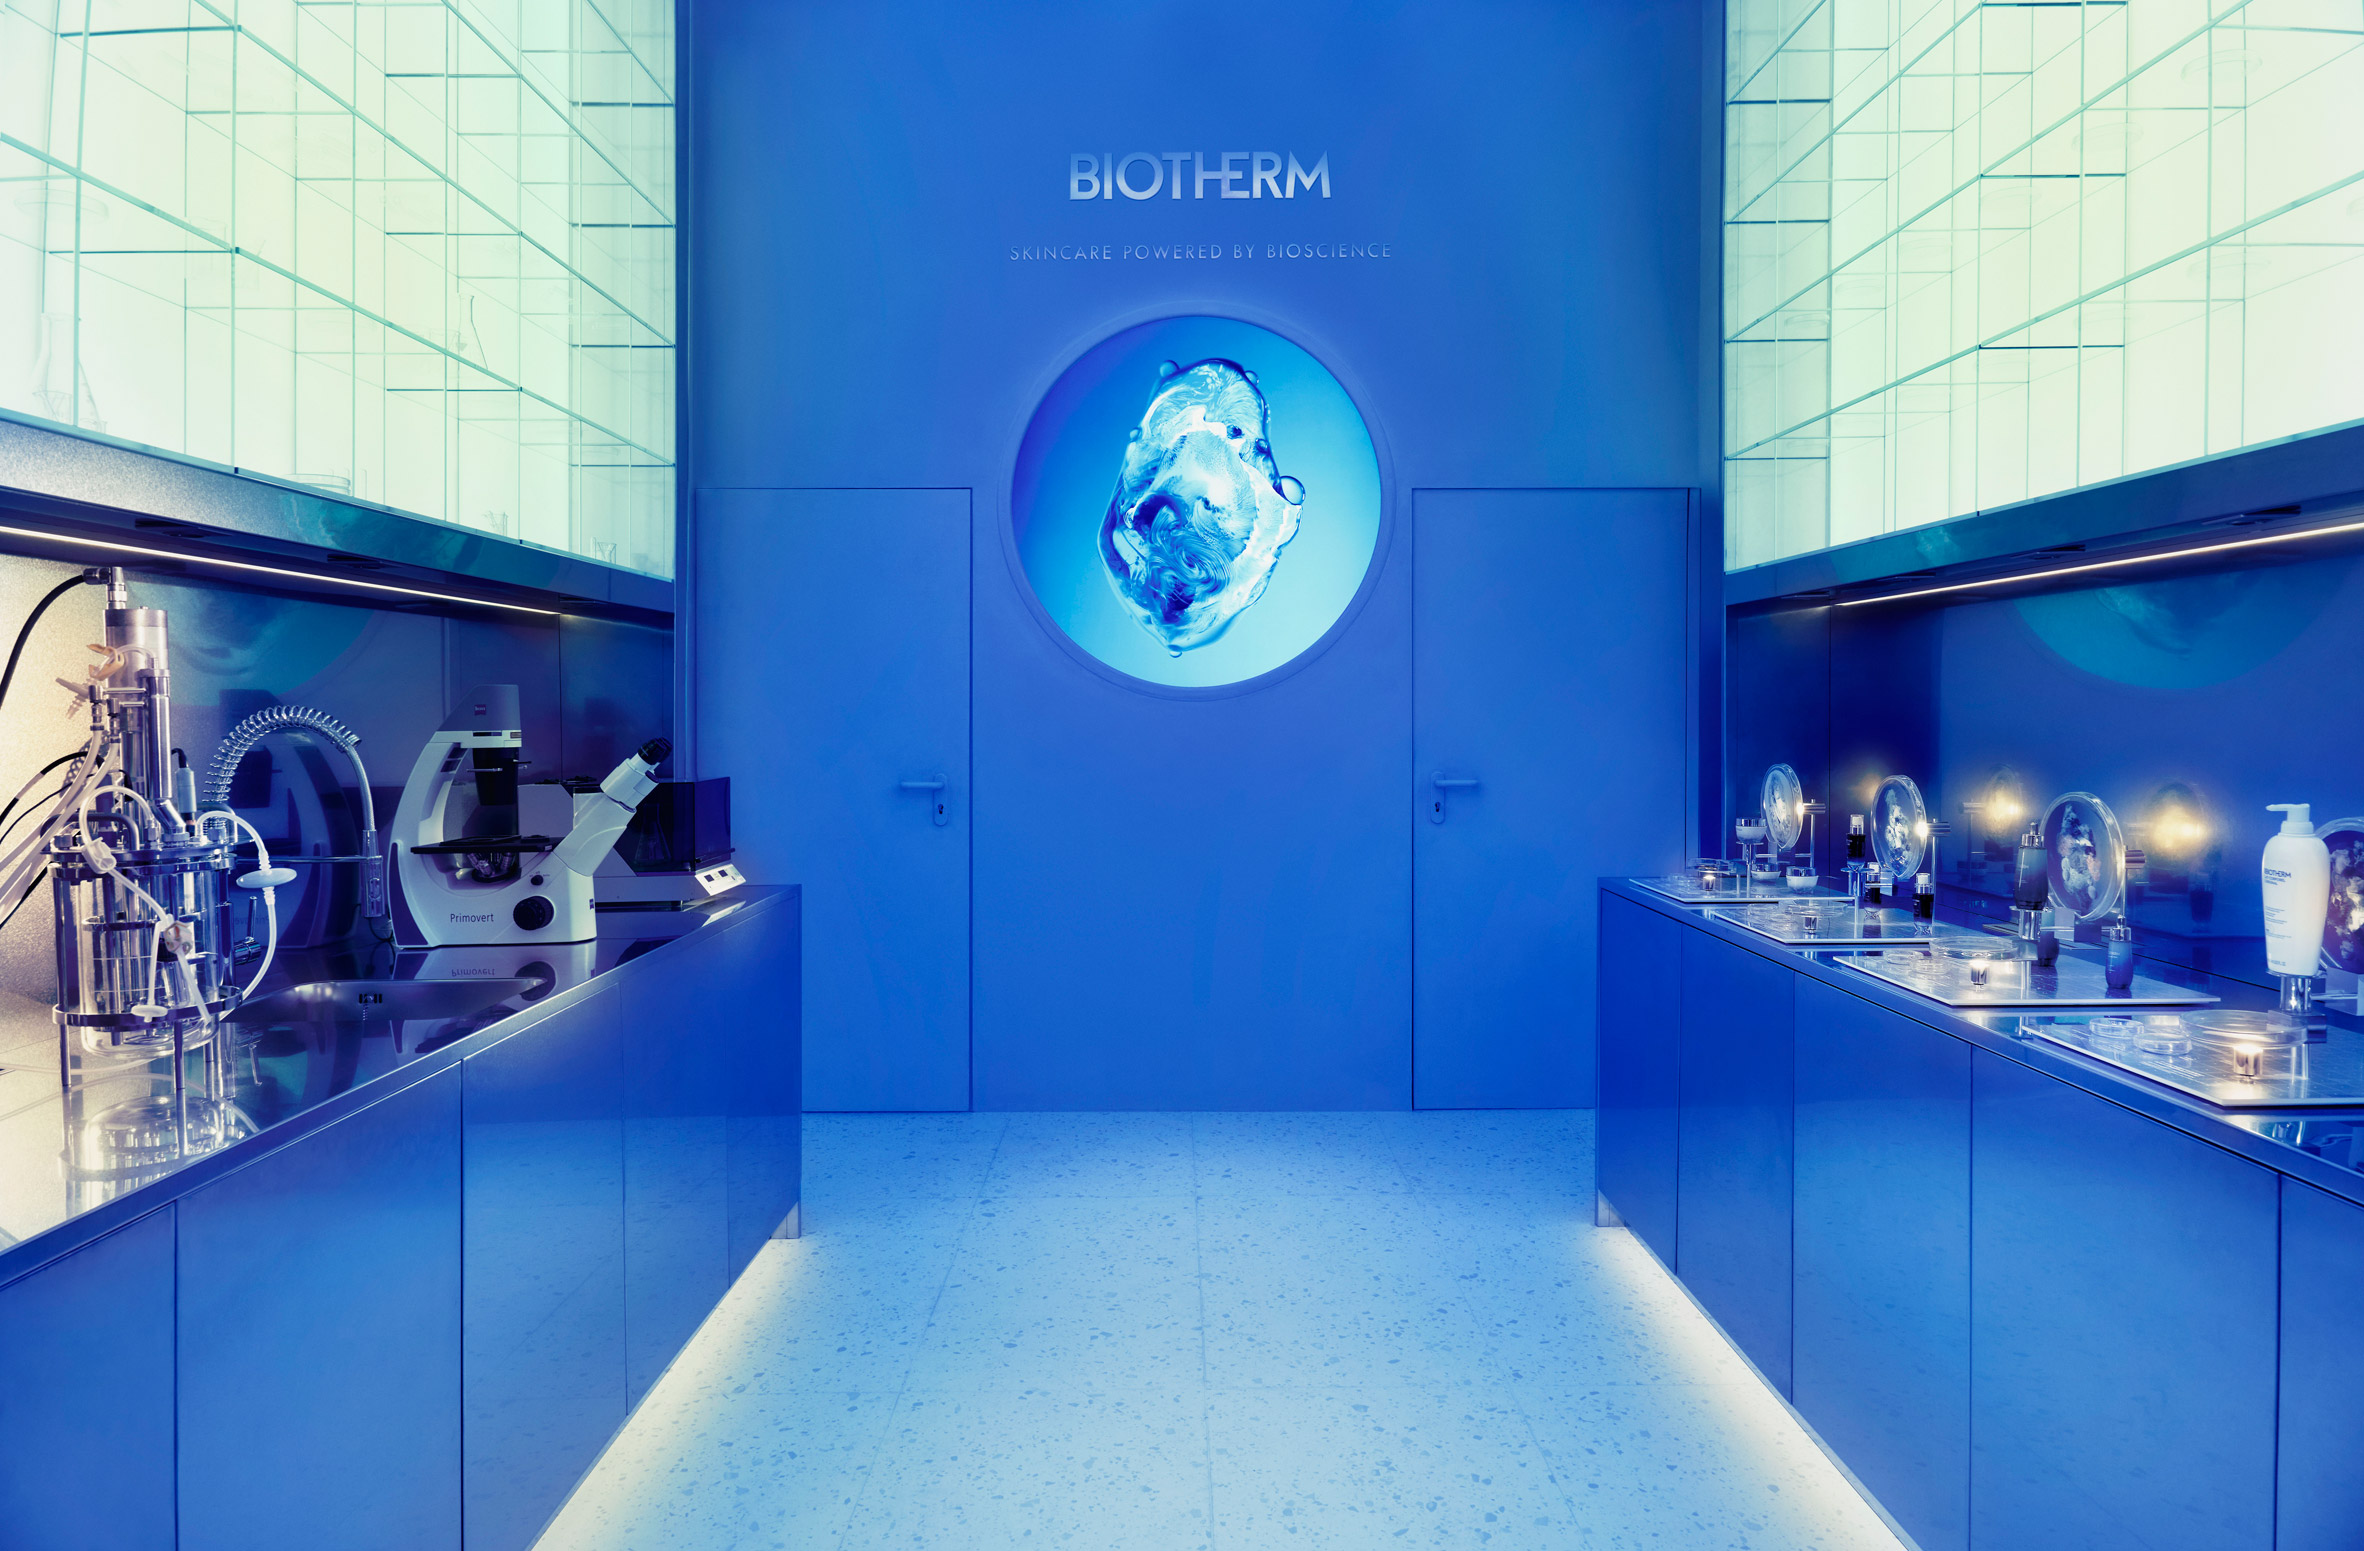 Biotherm concept store in Monaco has blue interiors with science lab-inspired details